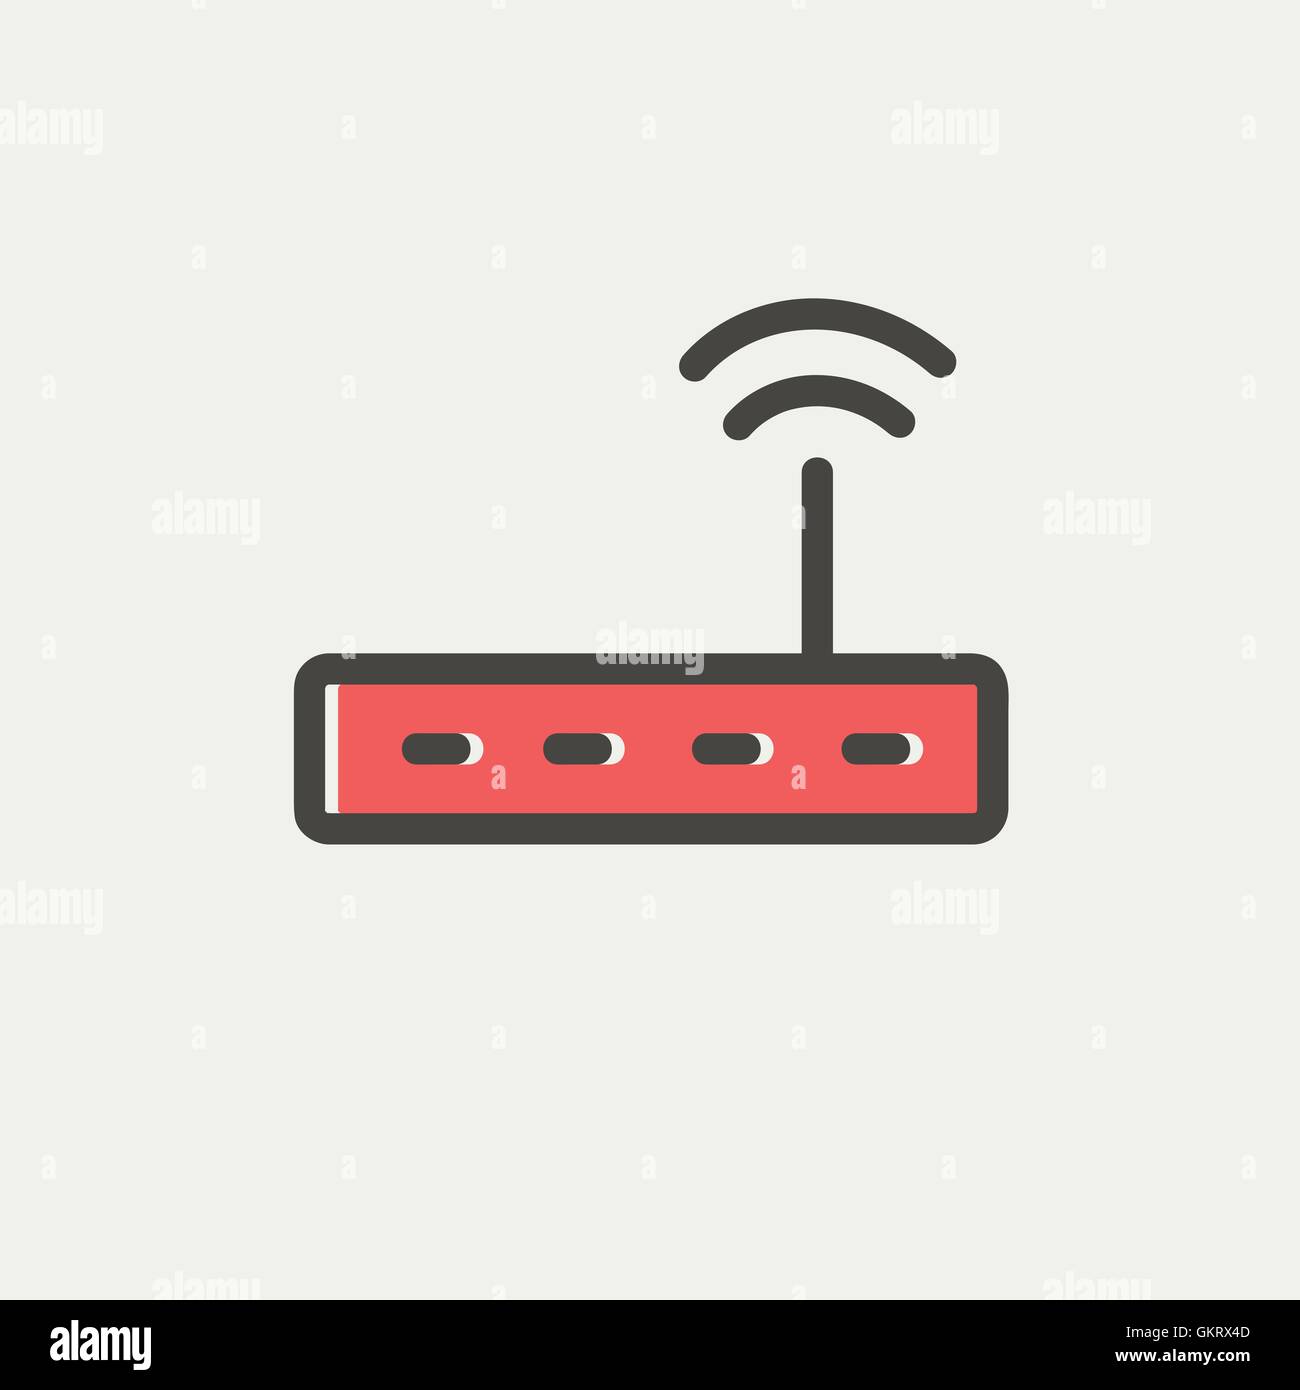 Wifi router modem thin line icon Stock Vector